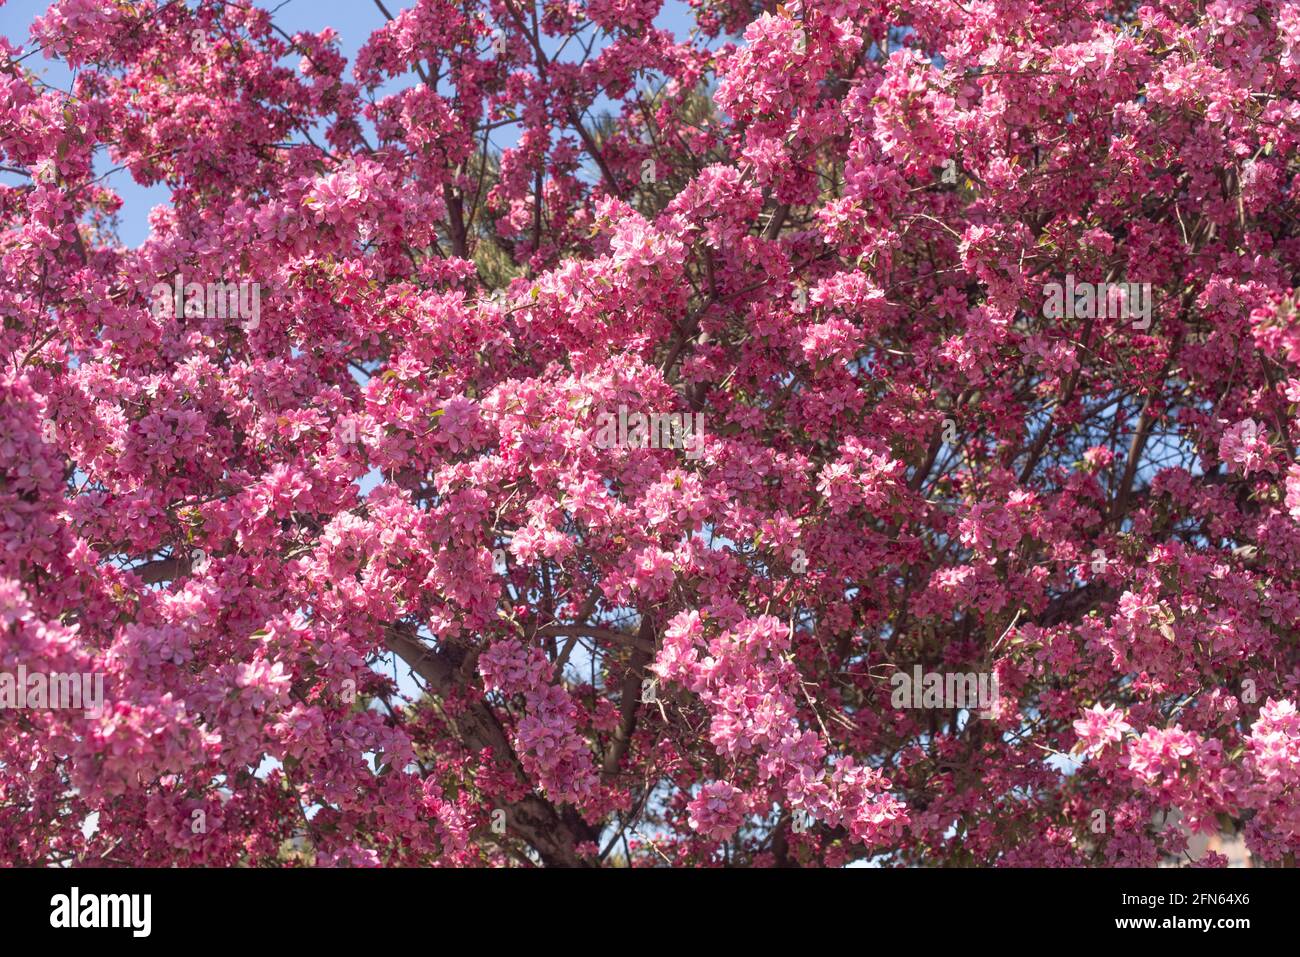 Full frame of a fully blossomed tree with pink flowers. Springtime season arrival in Toronto, Canada Stock Photo